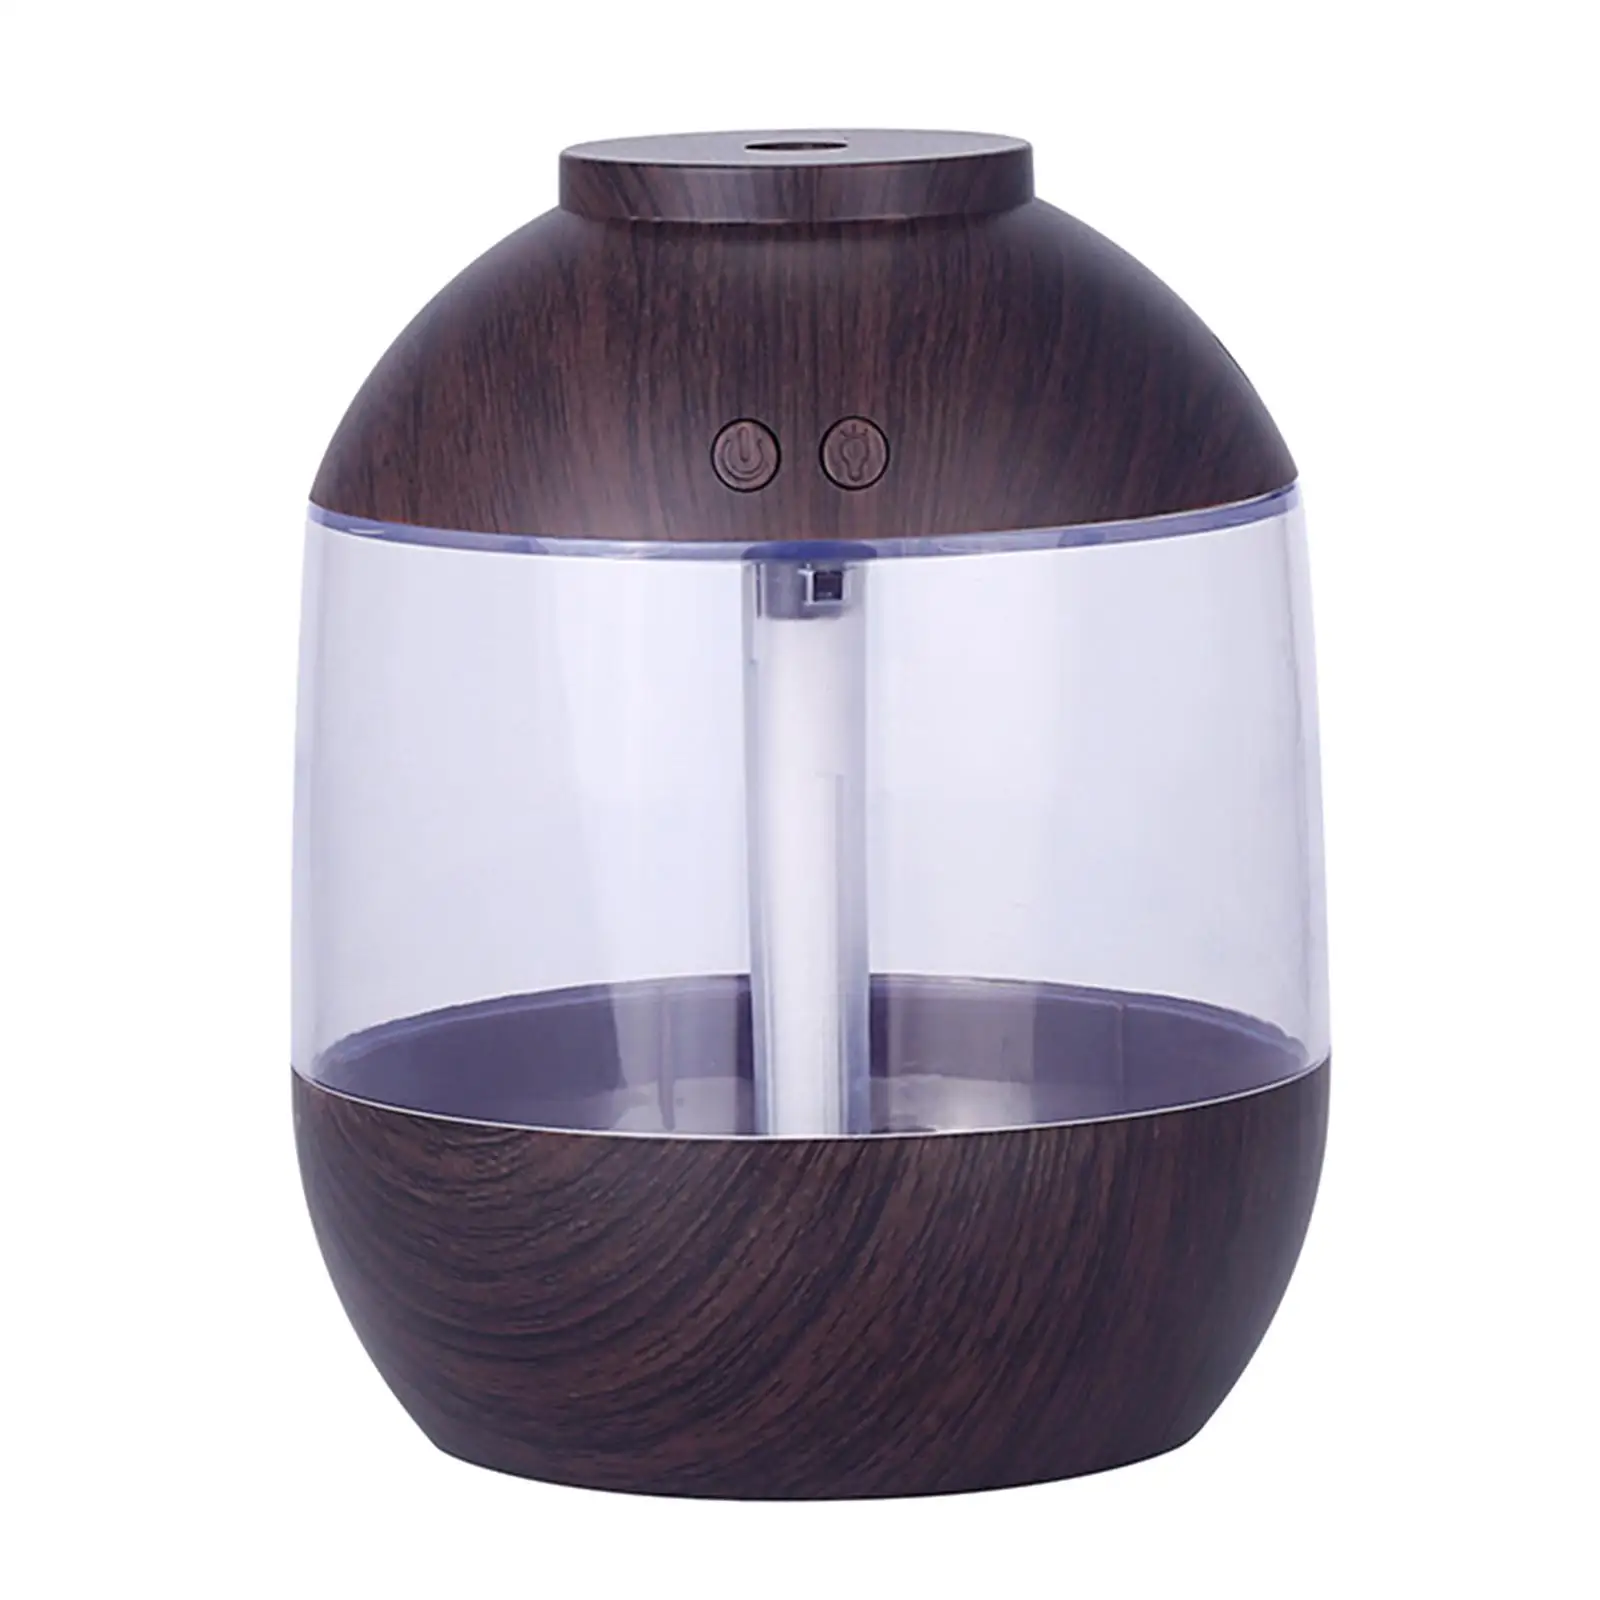 Wood Grain Humidifier Quite  with Night Lamp USB Essential Oil  for Bedroom  Room